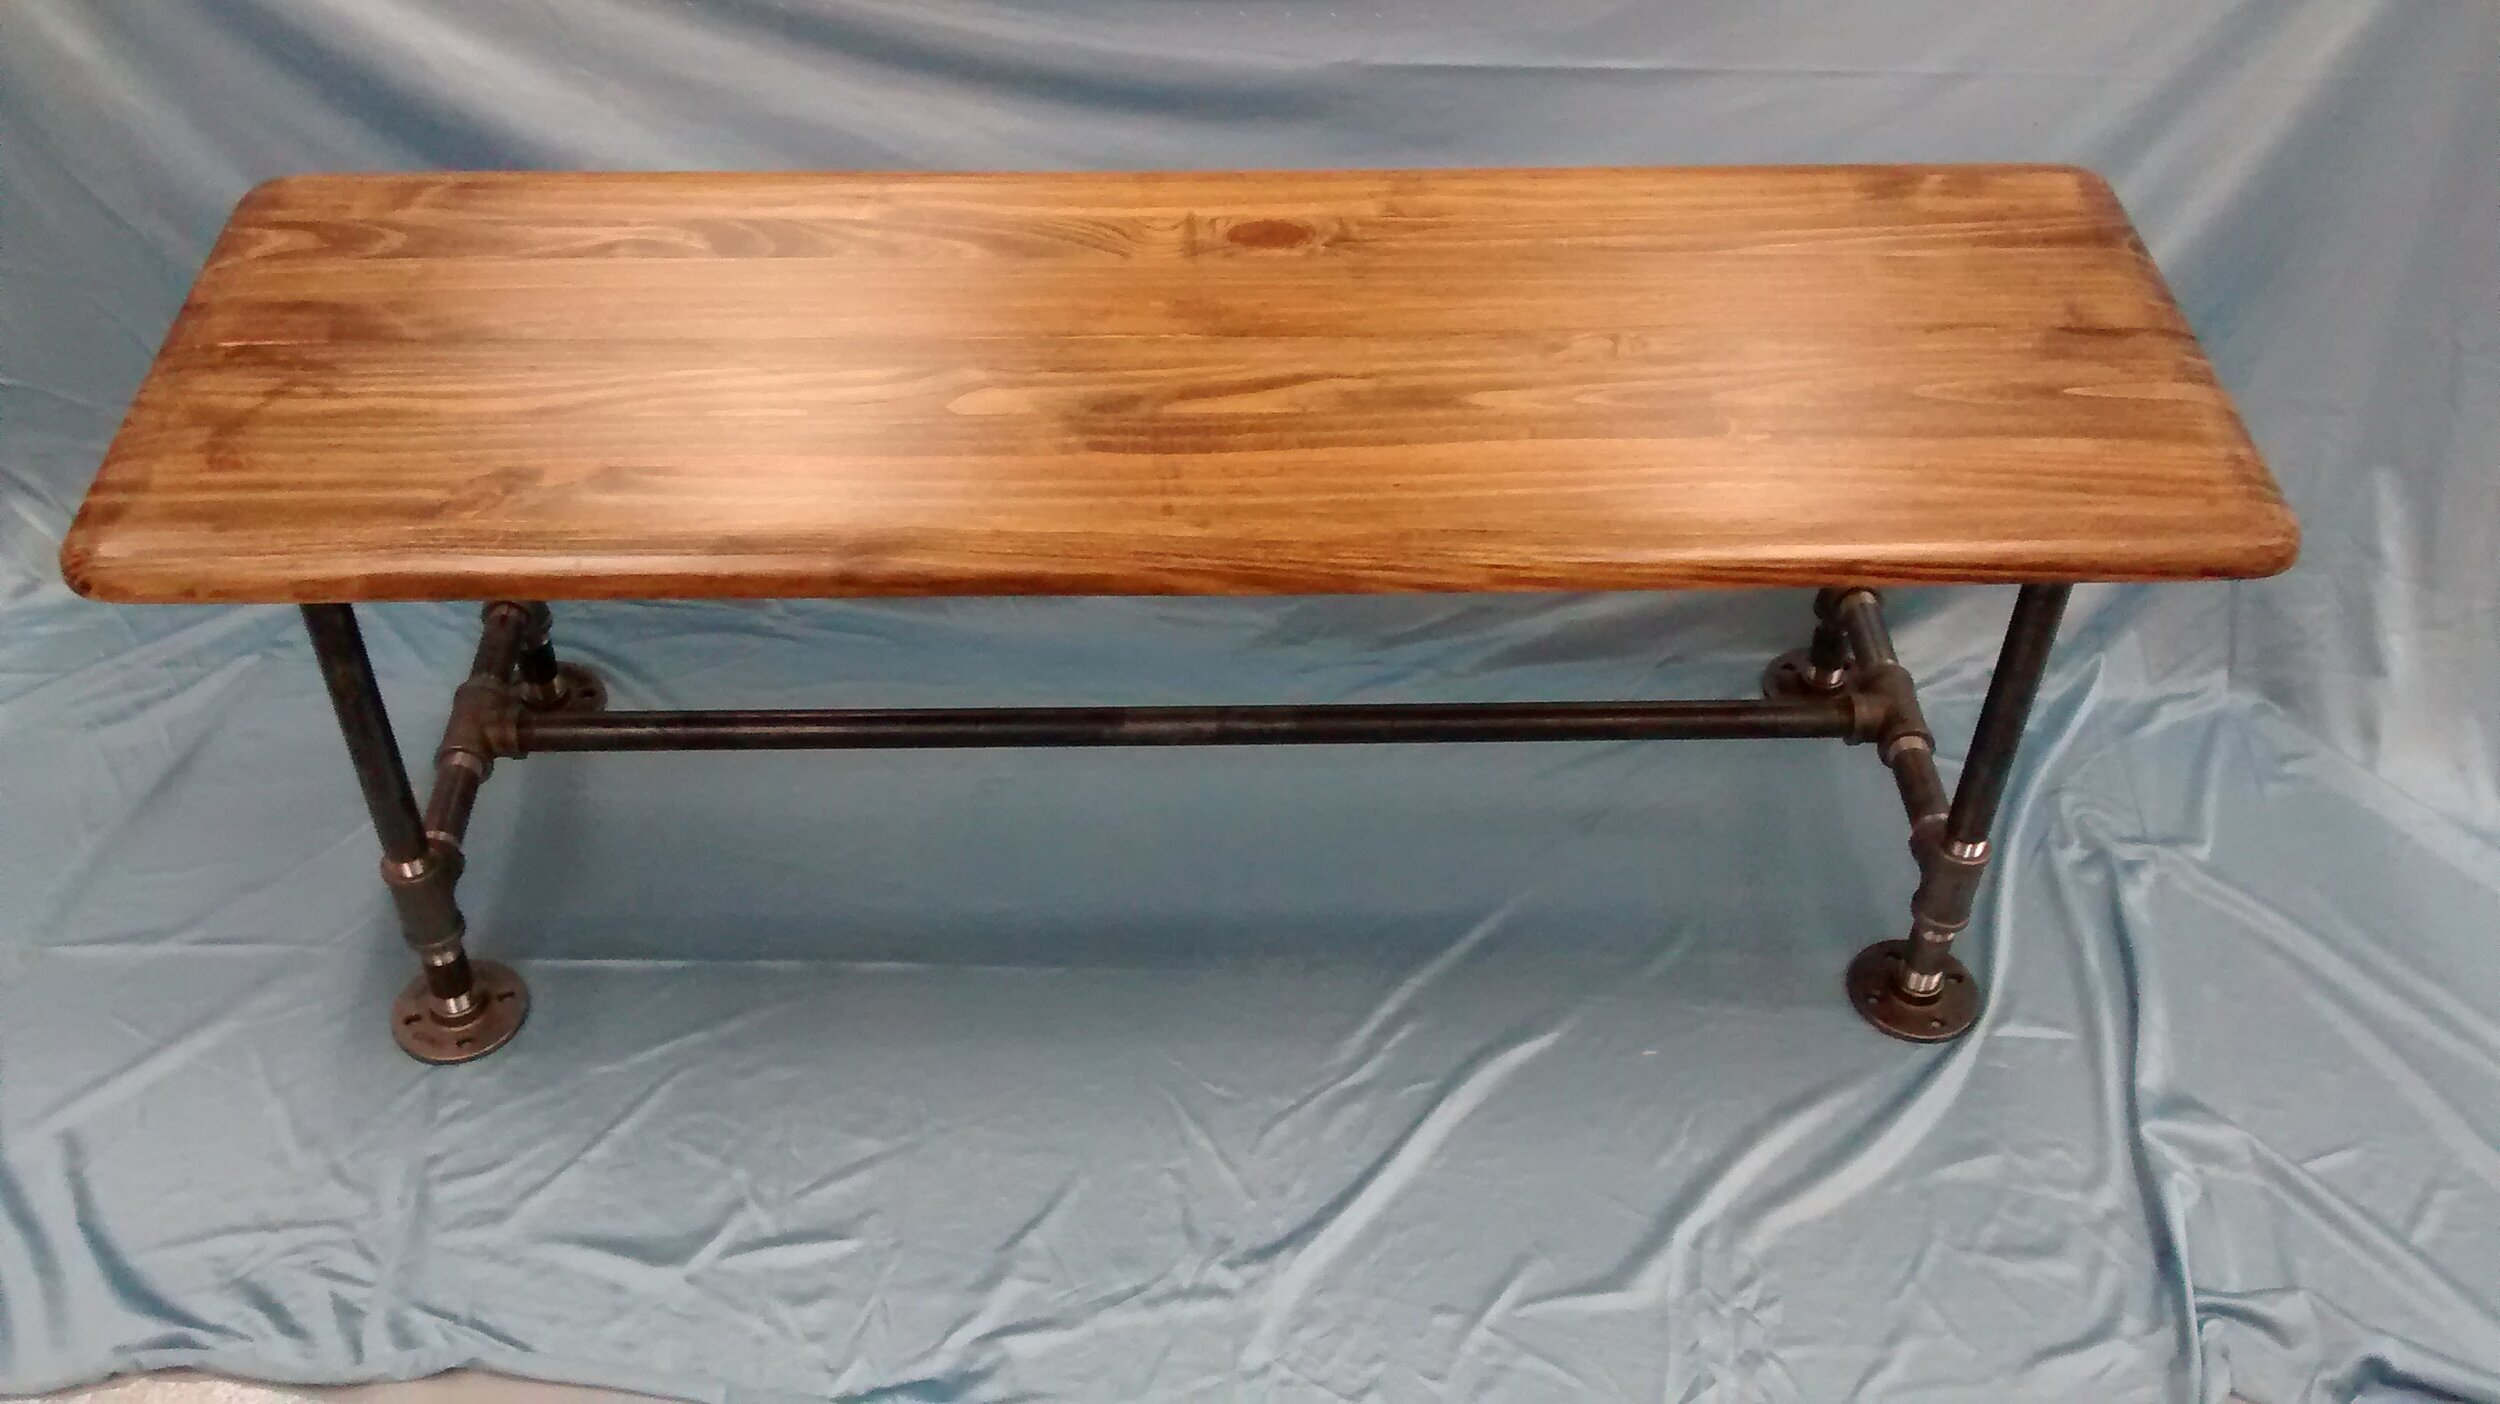 Reclaimed Wood Bench with Black Pipe Legs